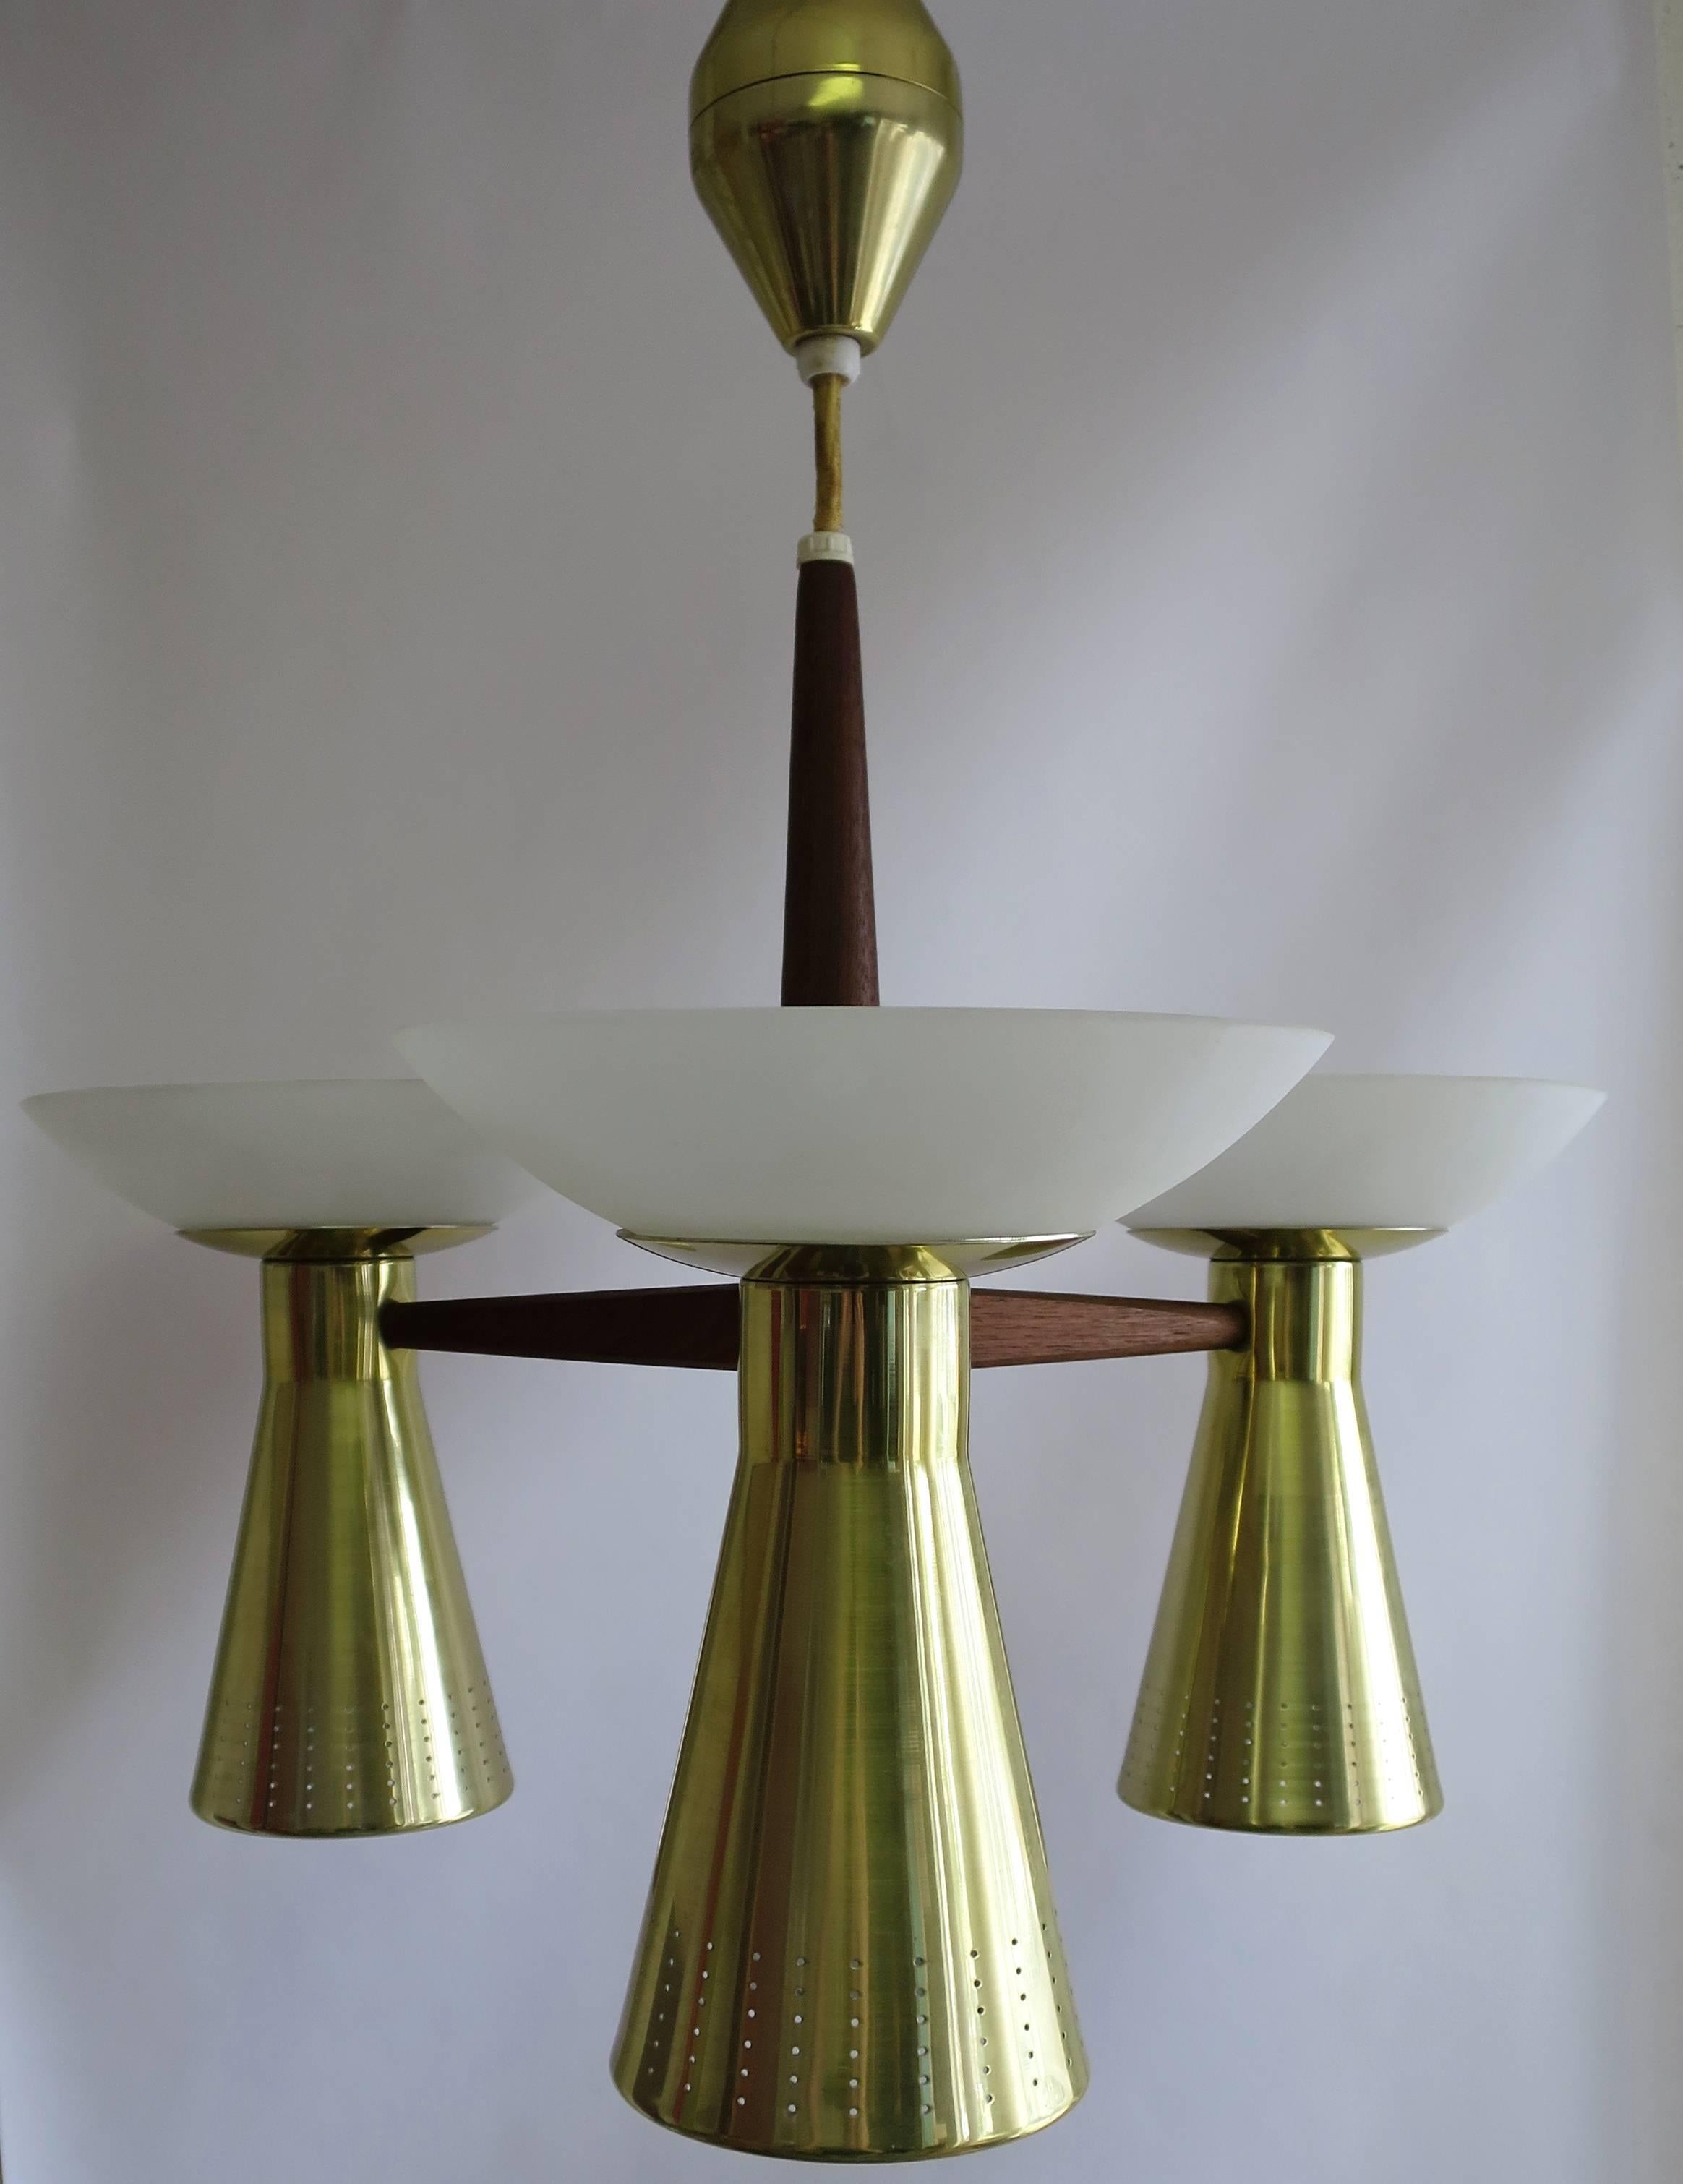 Vintage brass and walnut triple pendant hanging lamp chandelier by Lightolier. Three way switch (bulbs on top and bottom). Adjustable cord length. Very nice vintage condition, circa 1960s.